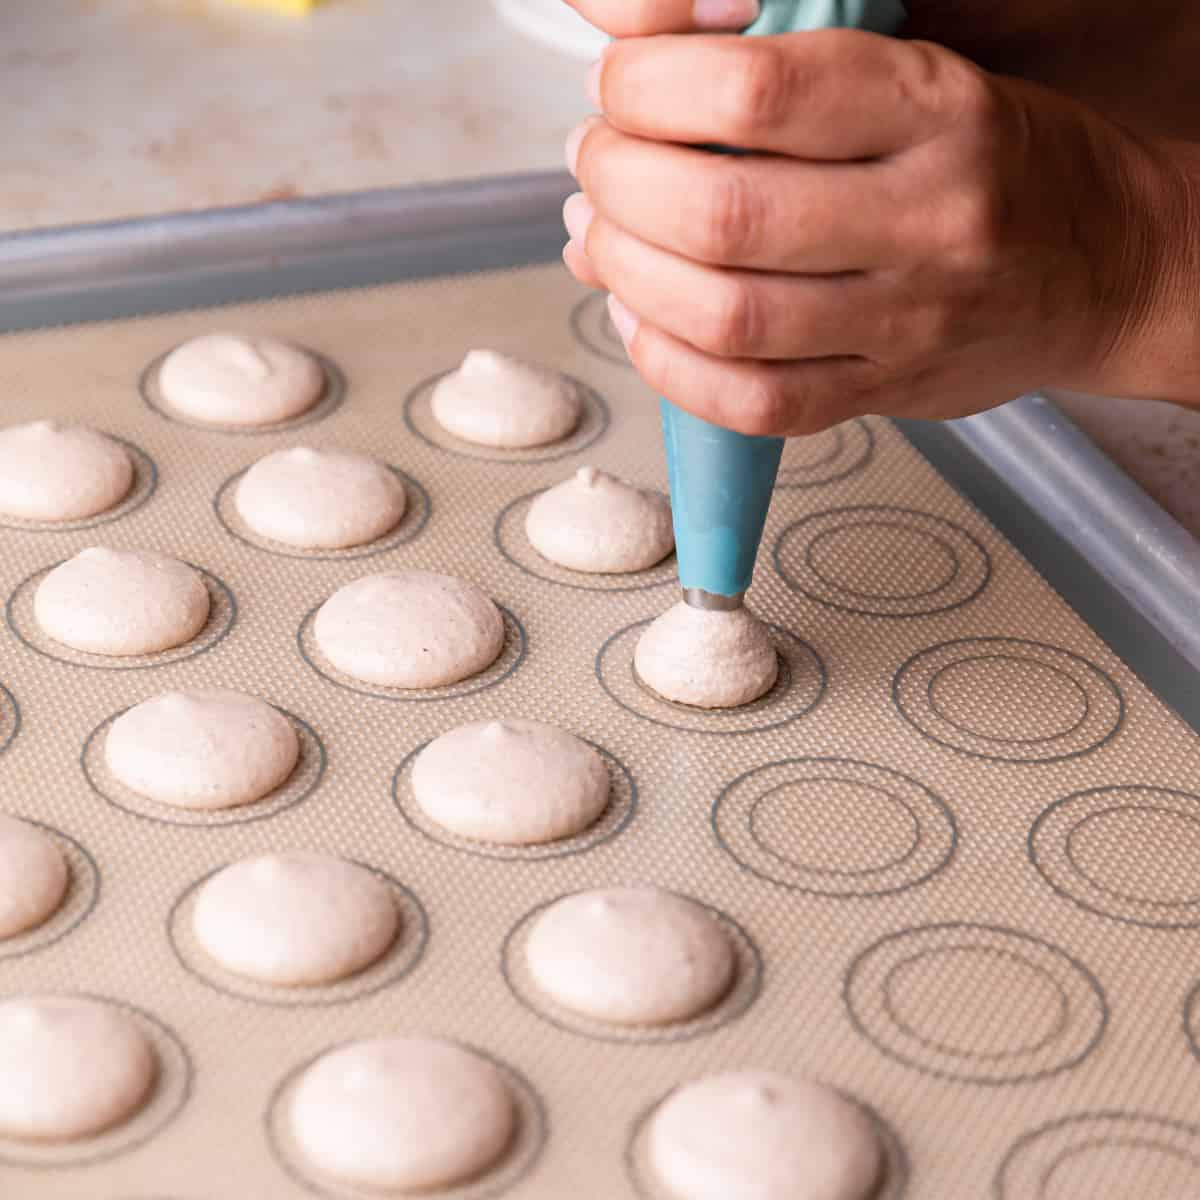 macarons being piped onto silicone mat with circles printed on it.